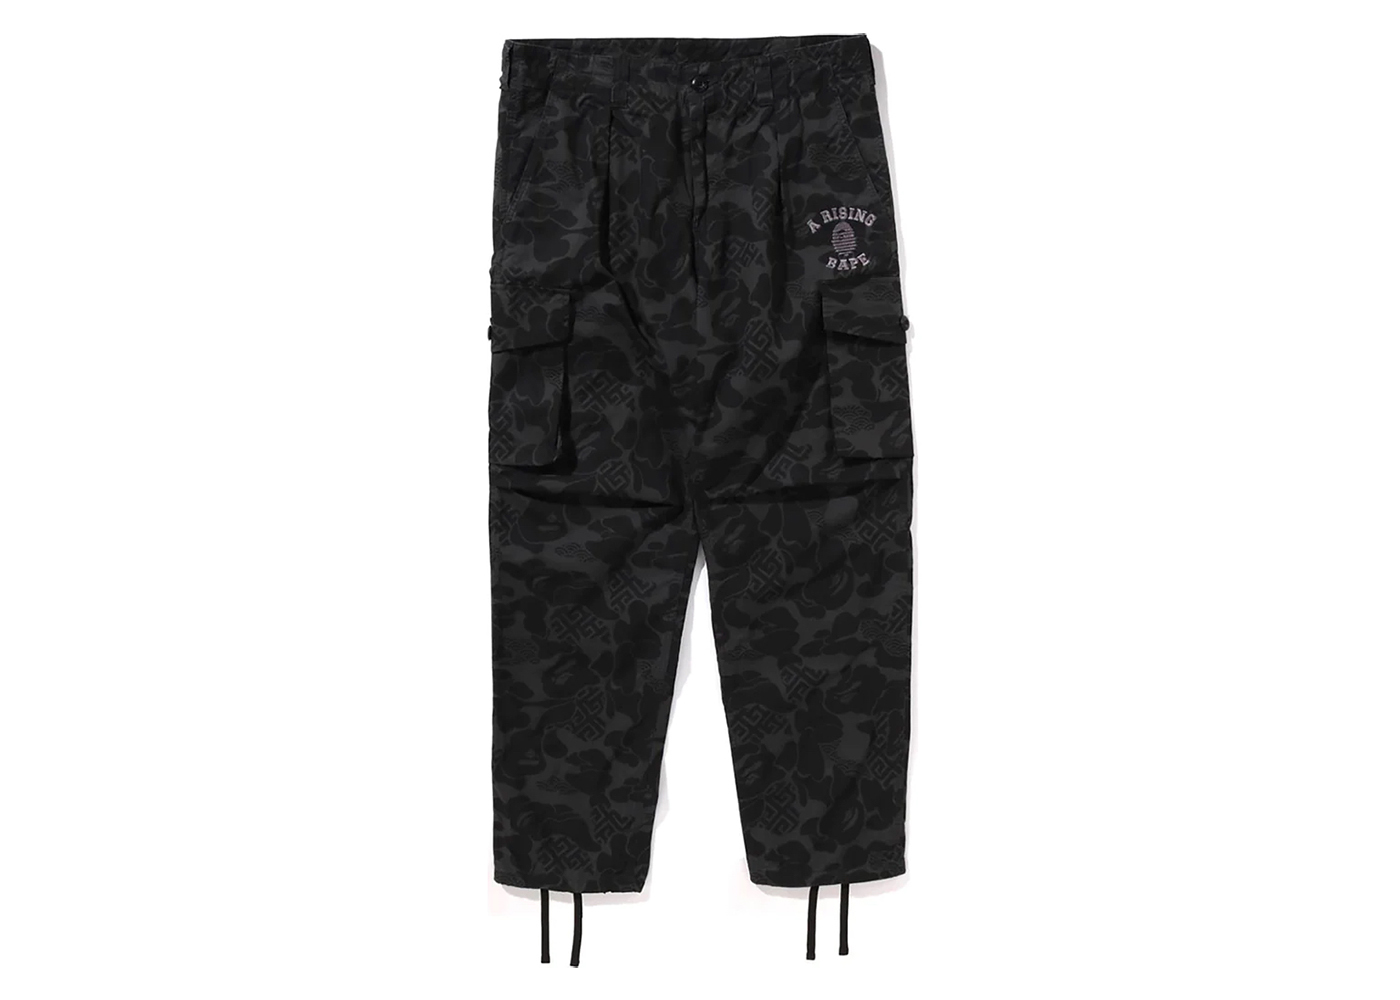 UNDERCOVER Nylon Army Pants UC1B4501-1 | Archive Factory